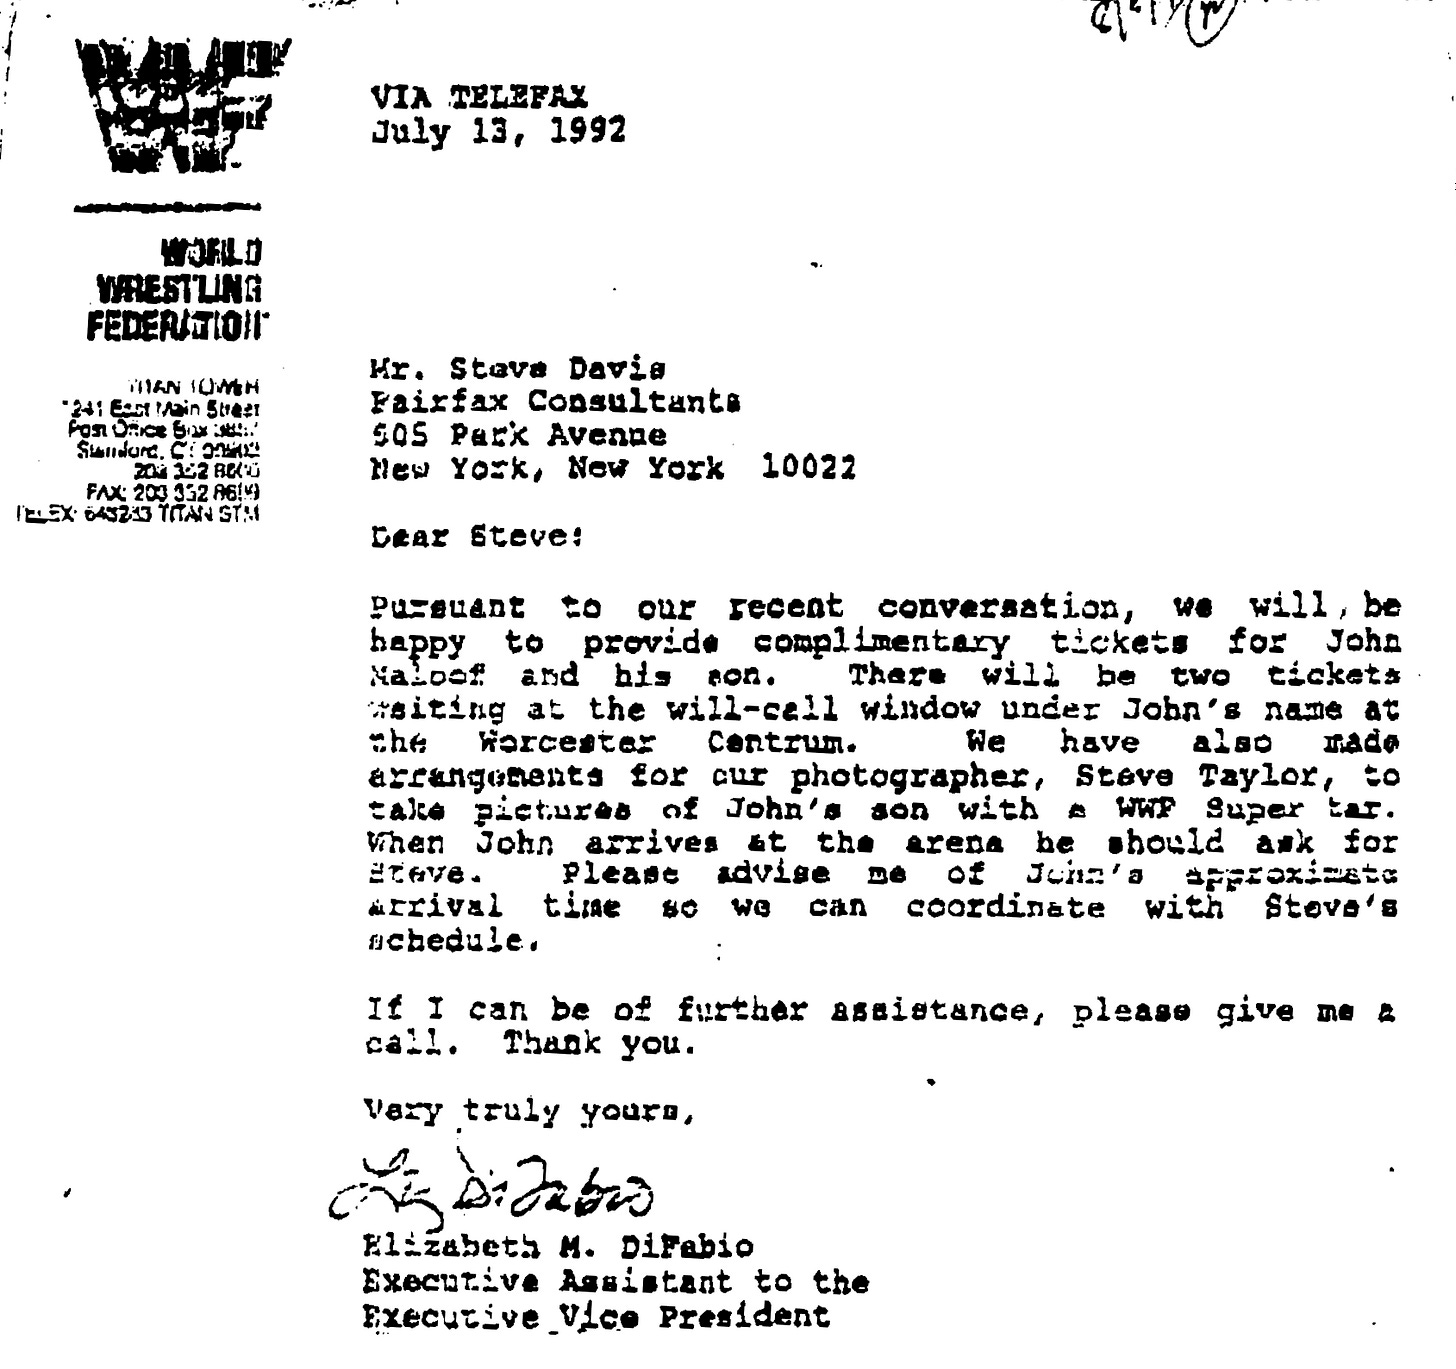 A letter sent from Titan Sports’ Elizabeth DiFabio to one of their private investigators.at Fairfax about John Maloof. (Image source; Federal court records.)